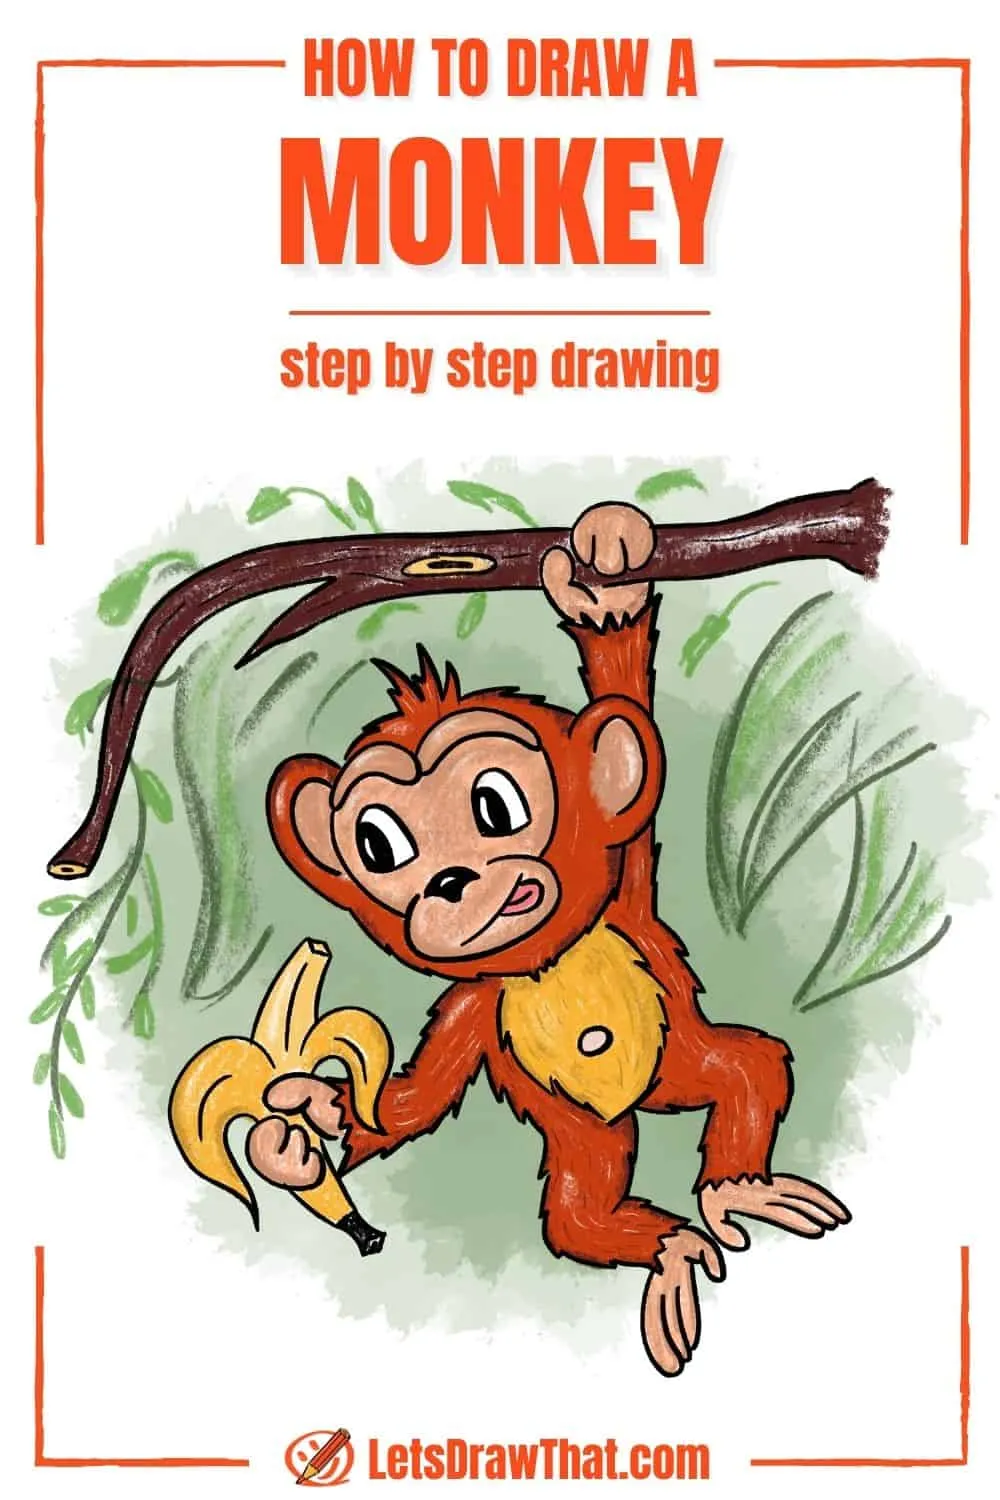 Draw a chimpanzee. 🐵 Easy drawing lesson for beginners on how to draw... |  TikTok